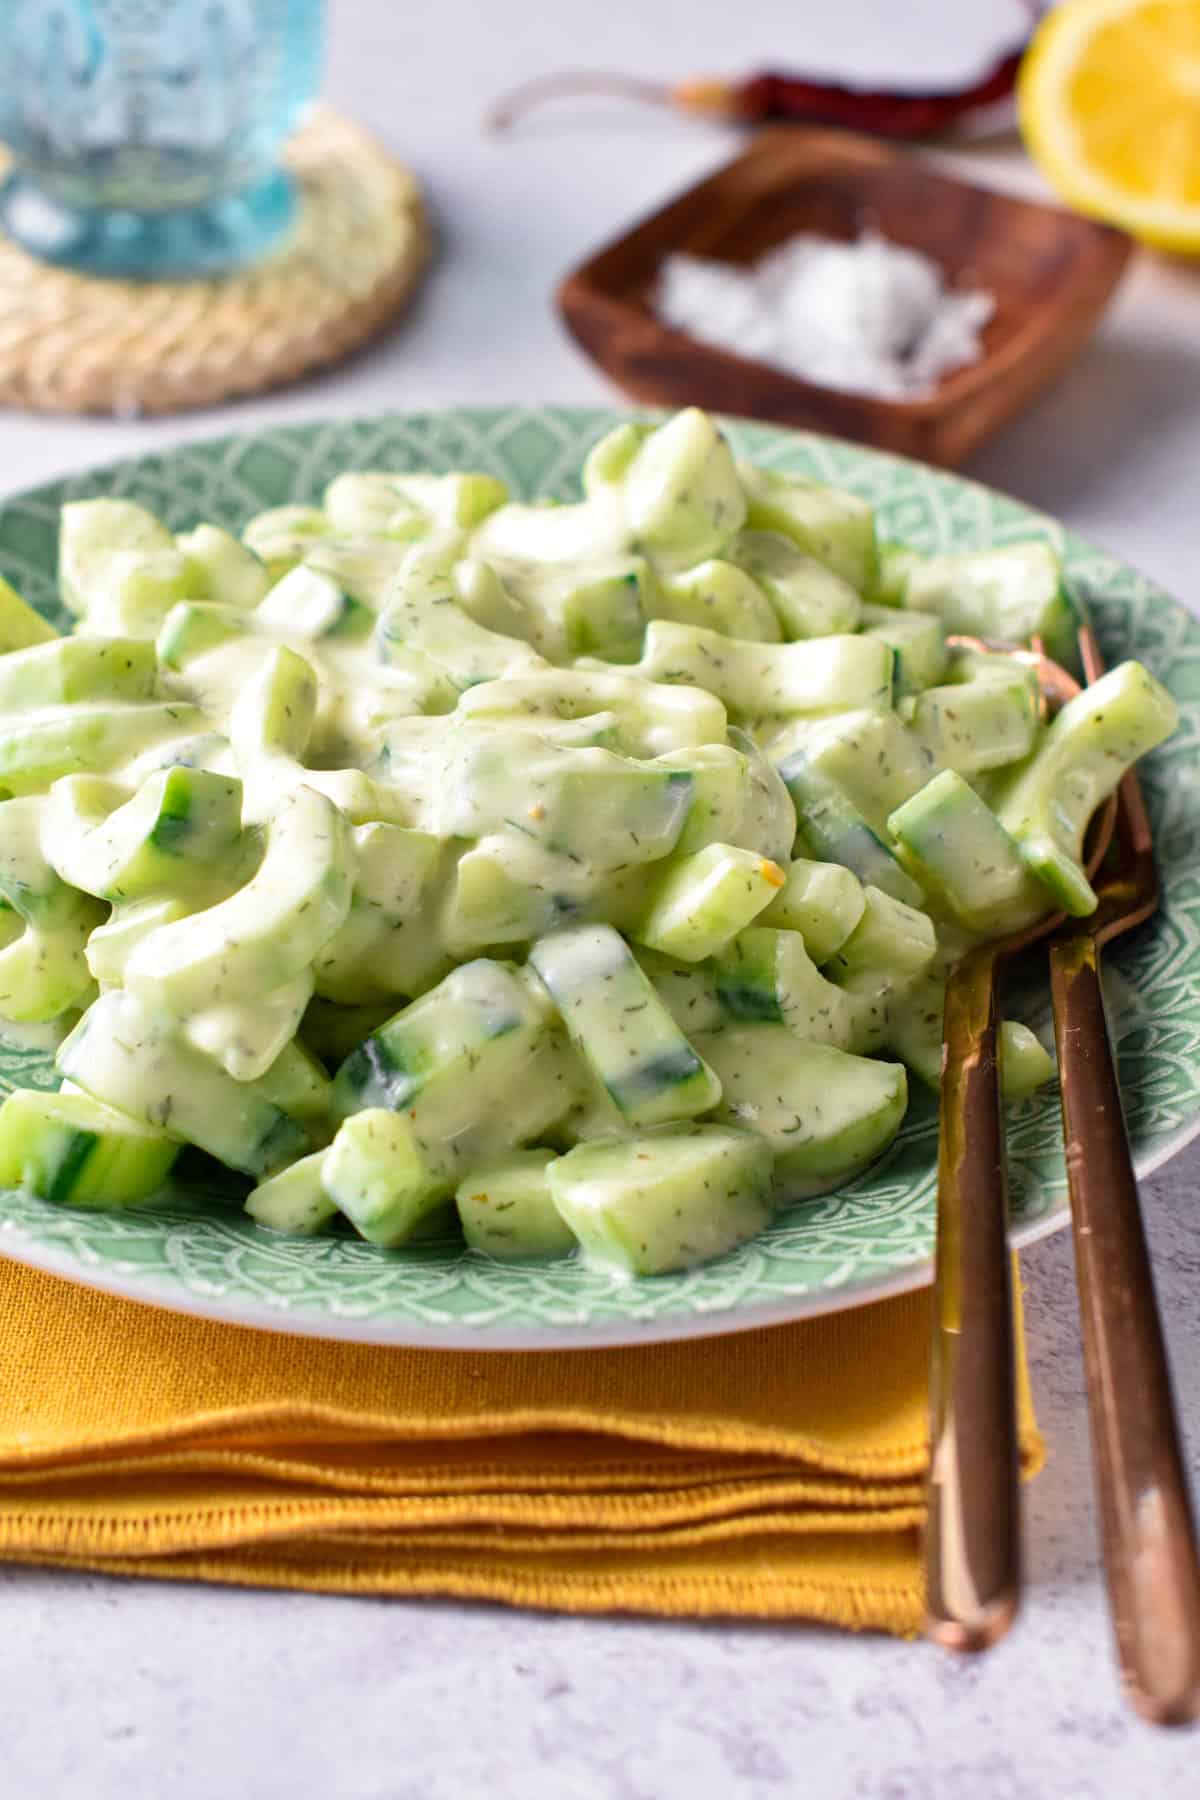 This Cucumber Yogurt Salad is a refreshing, healthy summer salad perfect as a side or light meal or to fill pita bread for a tasty sandwich